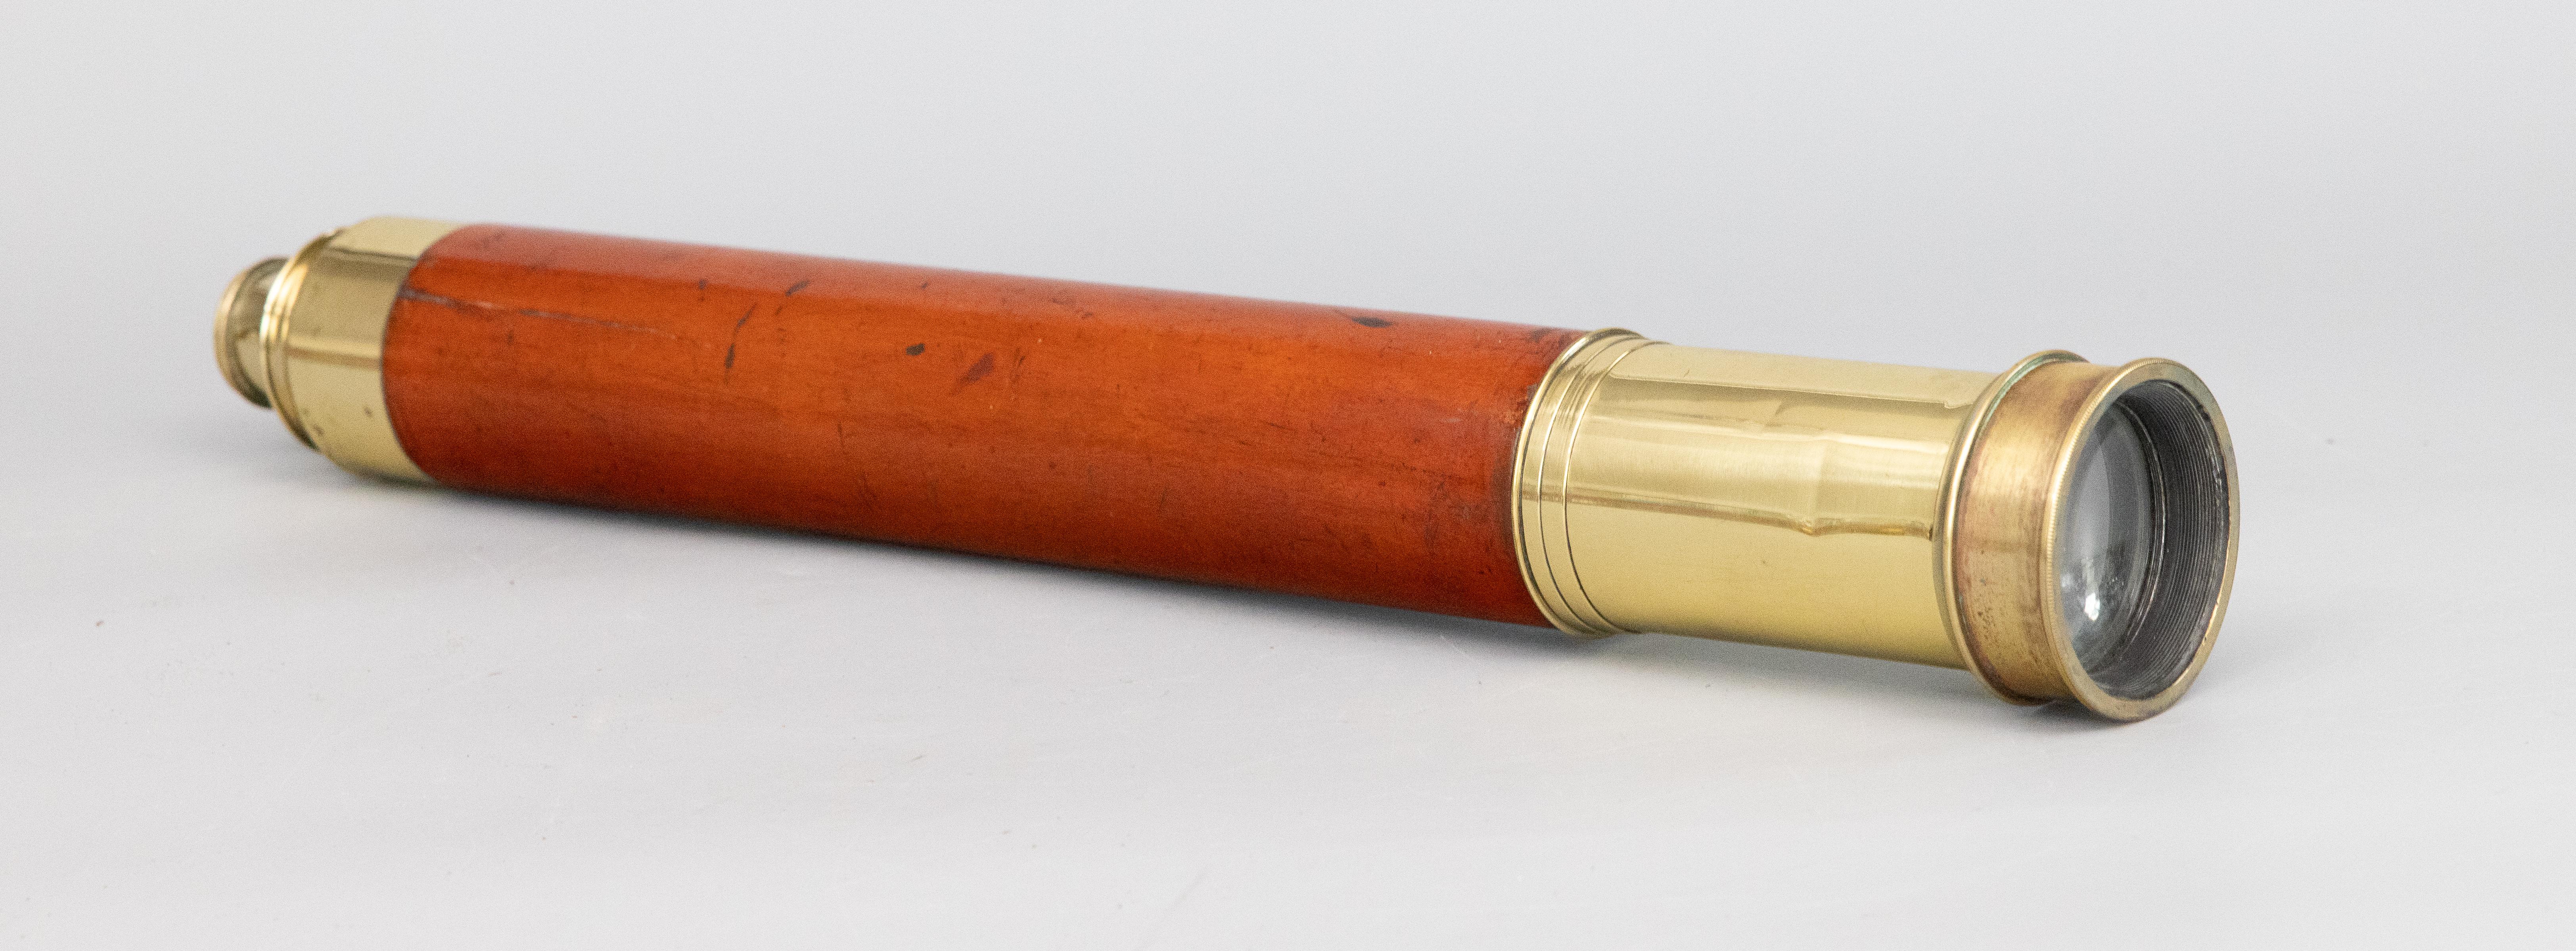 A superb large antique English mahogany and brass nautical maritime telescope or spyglass, London, circa 1850. Inscribed 